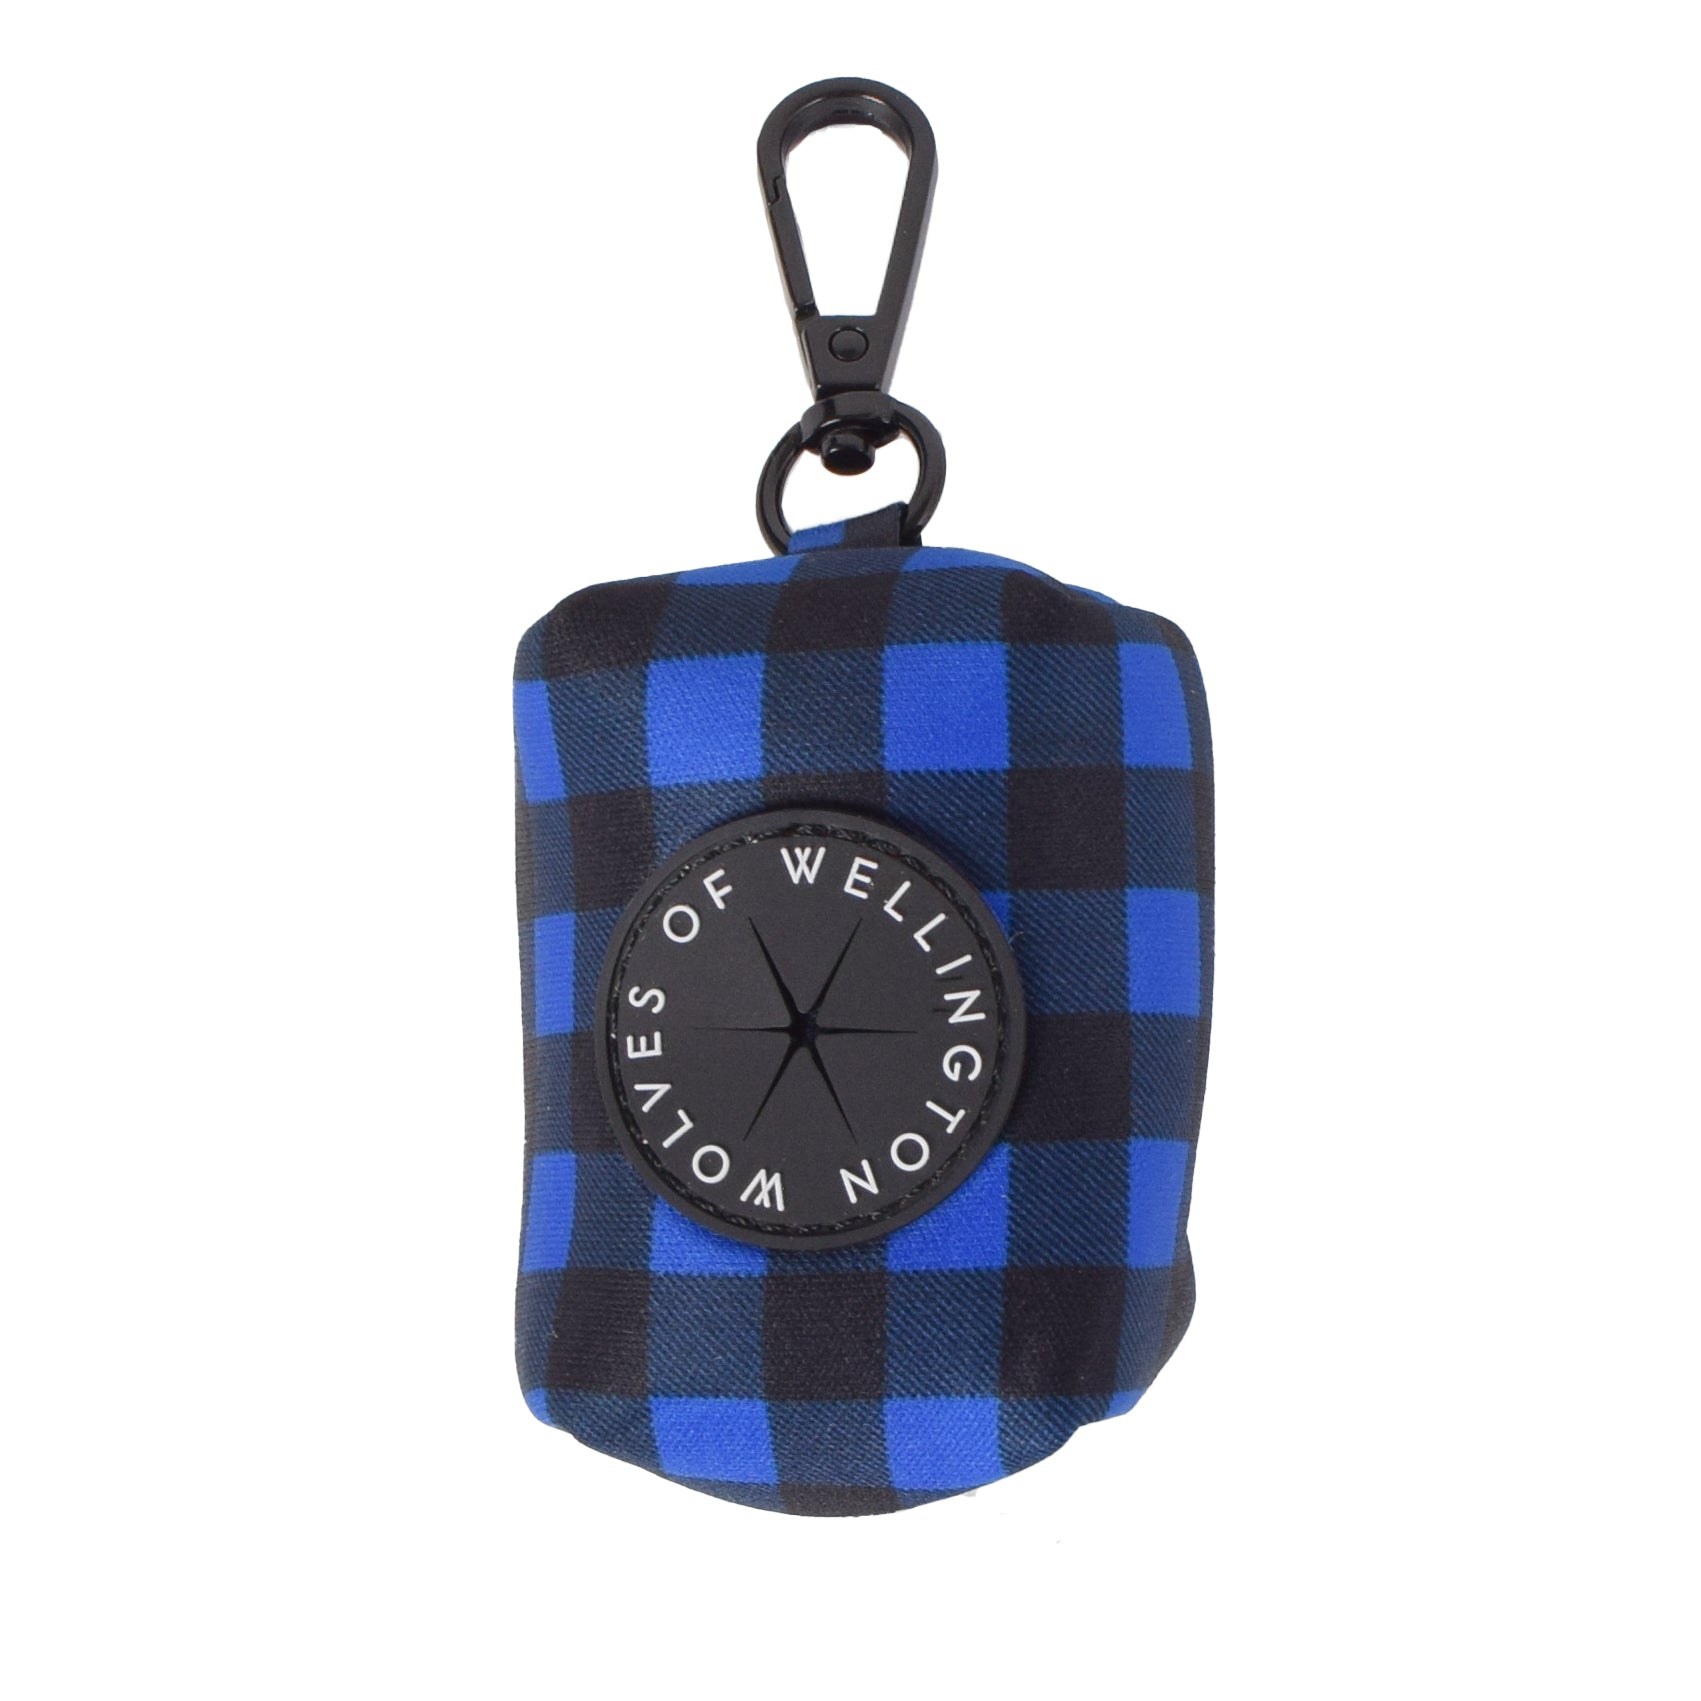 Neoprene dog poop bag pouch in blue and black check pattern.